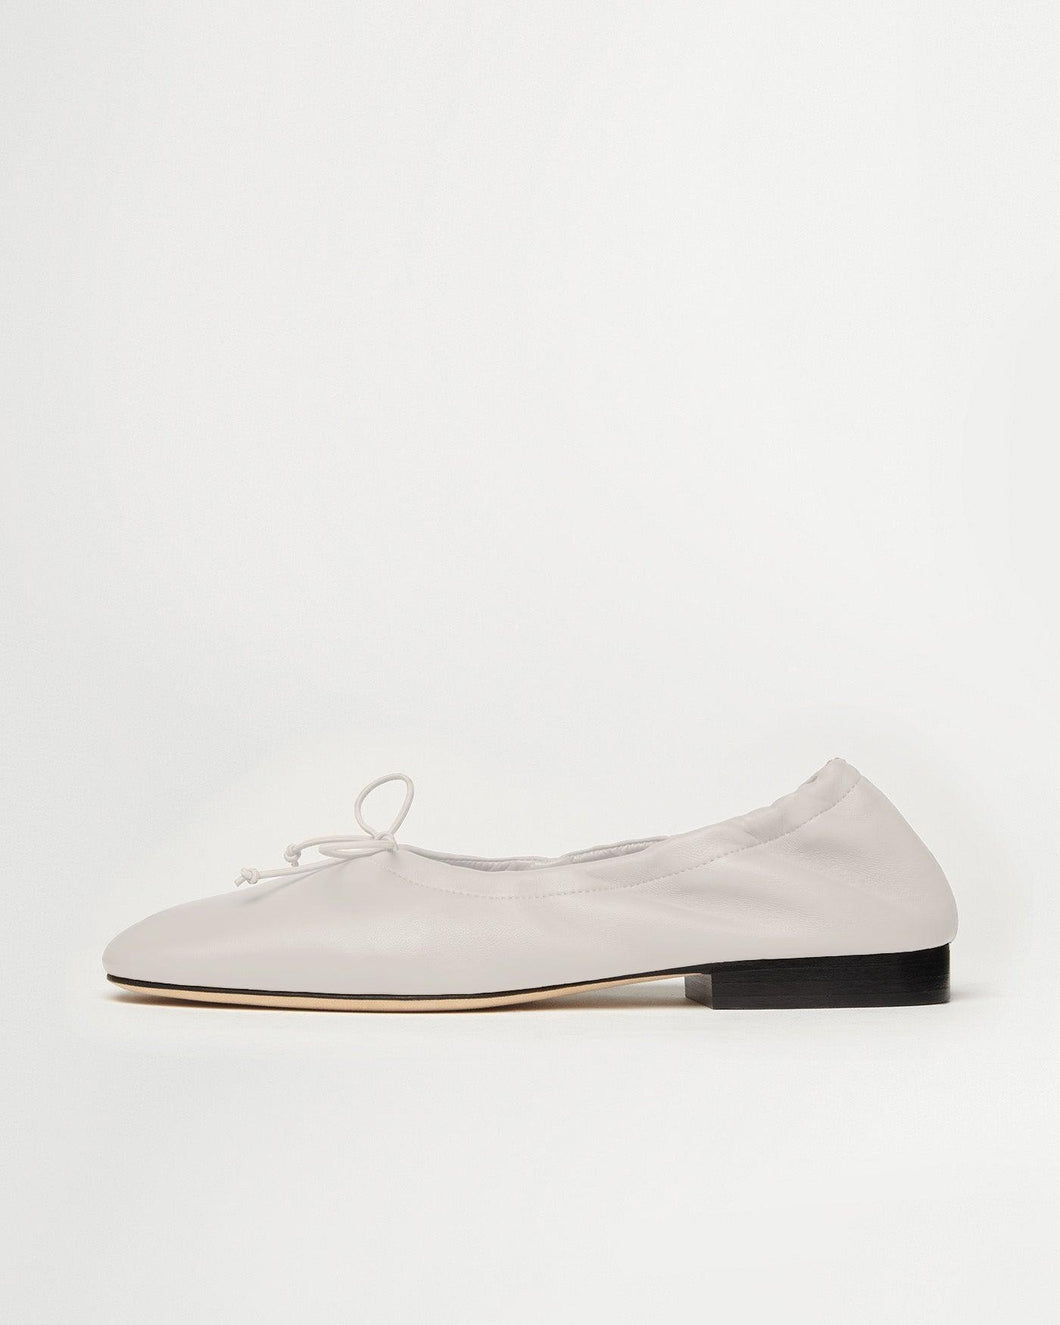 Side view of Yuni Buffa Pia Ballet flat designer shoes in Cloud White. Luxury hand crafted square toe ballet flats made in Italy with Italian soft Lamb Nappa leather.